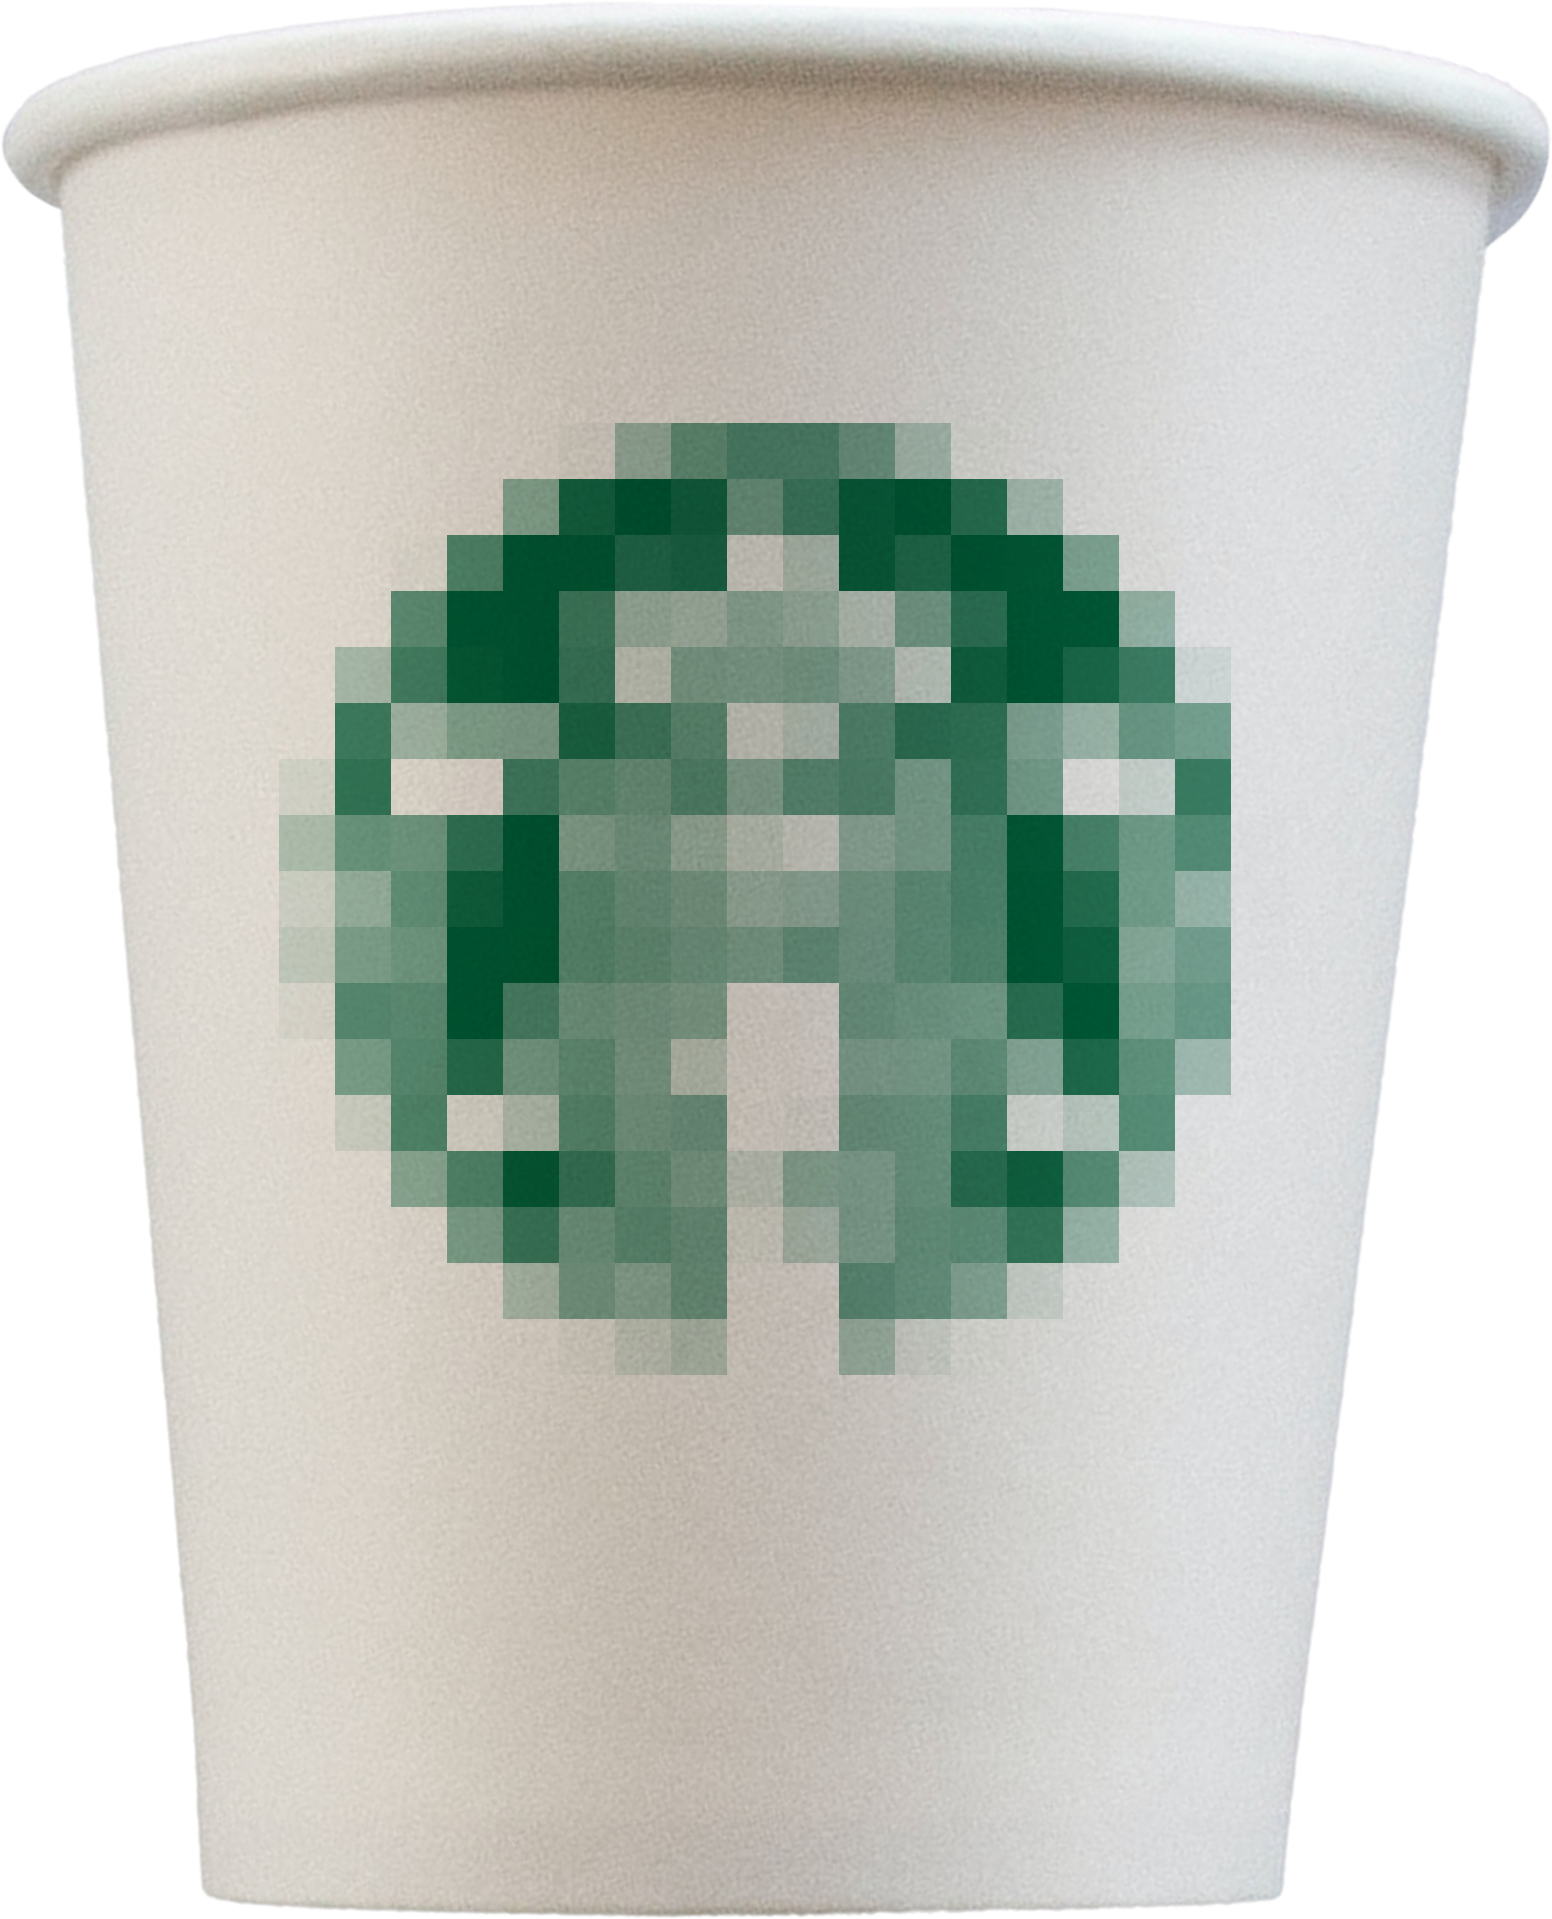 A blurred image of a Starbucks cup